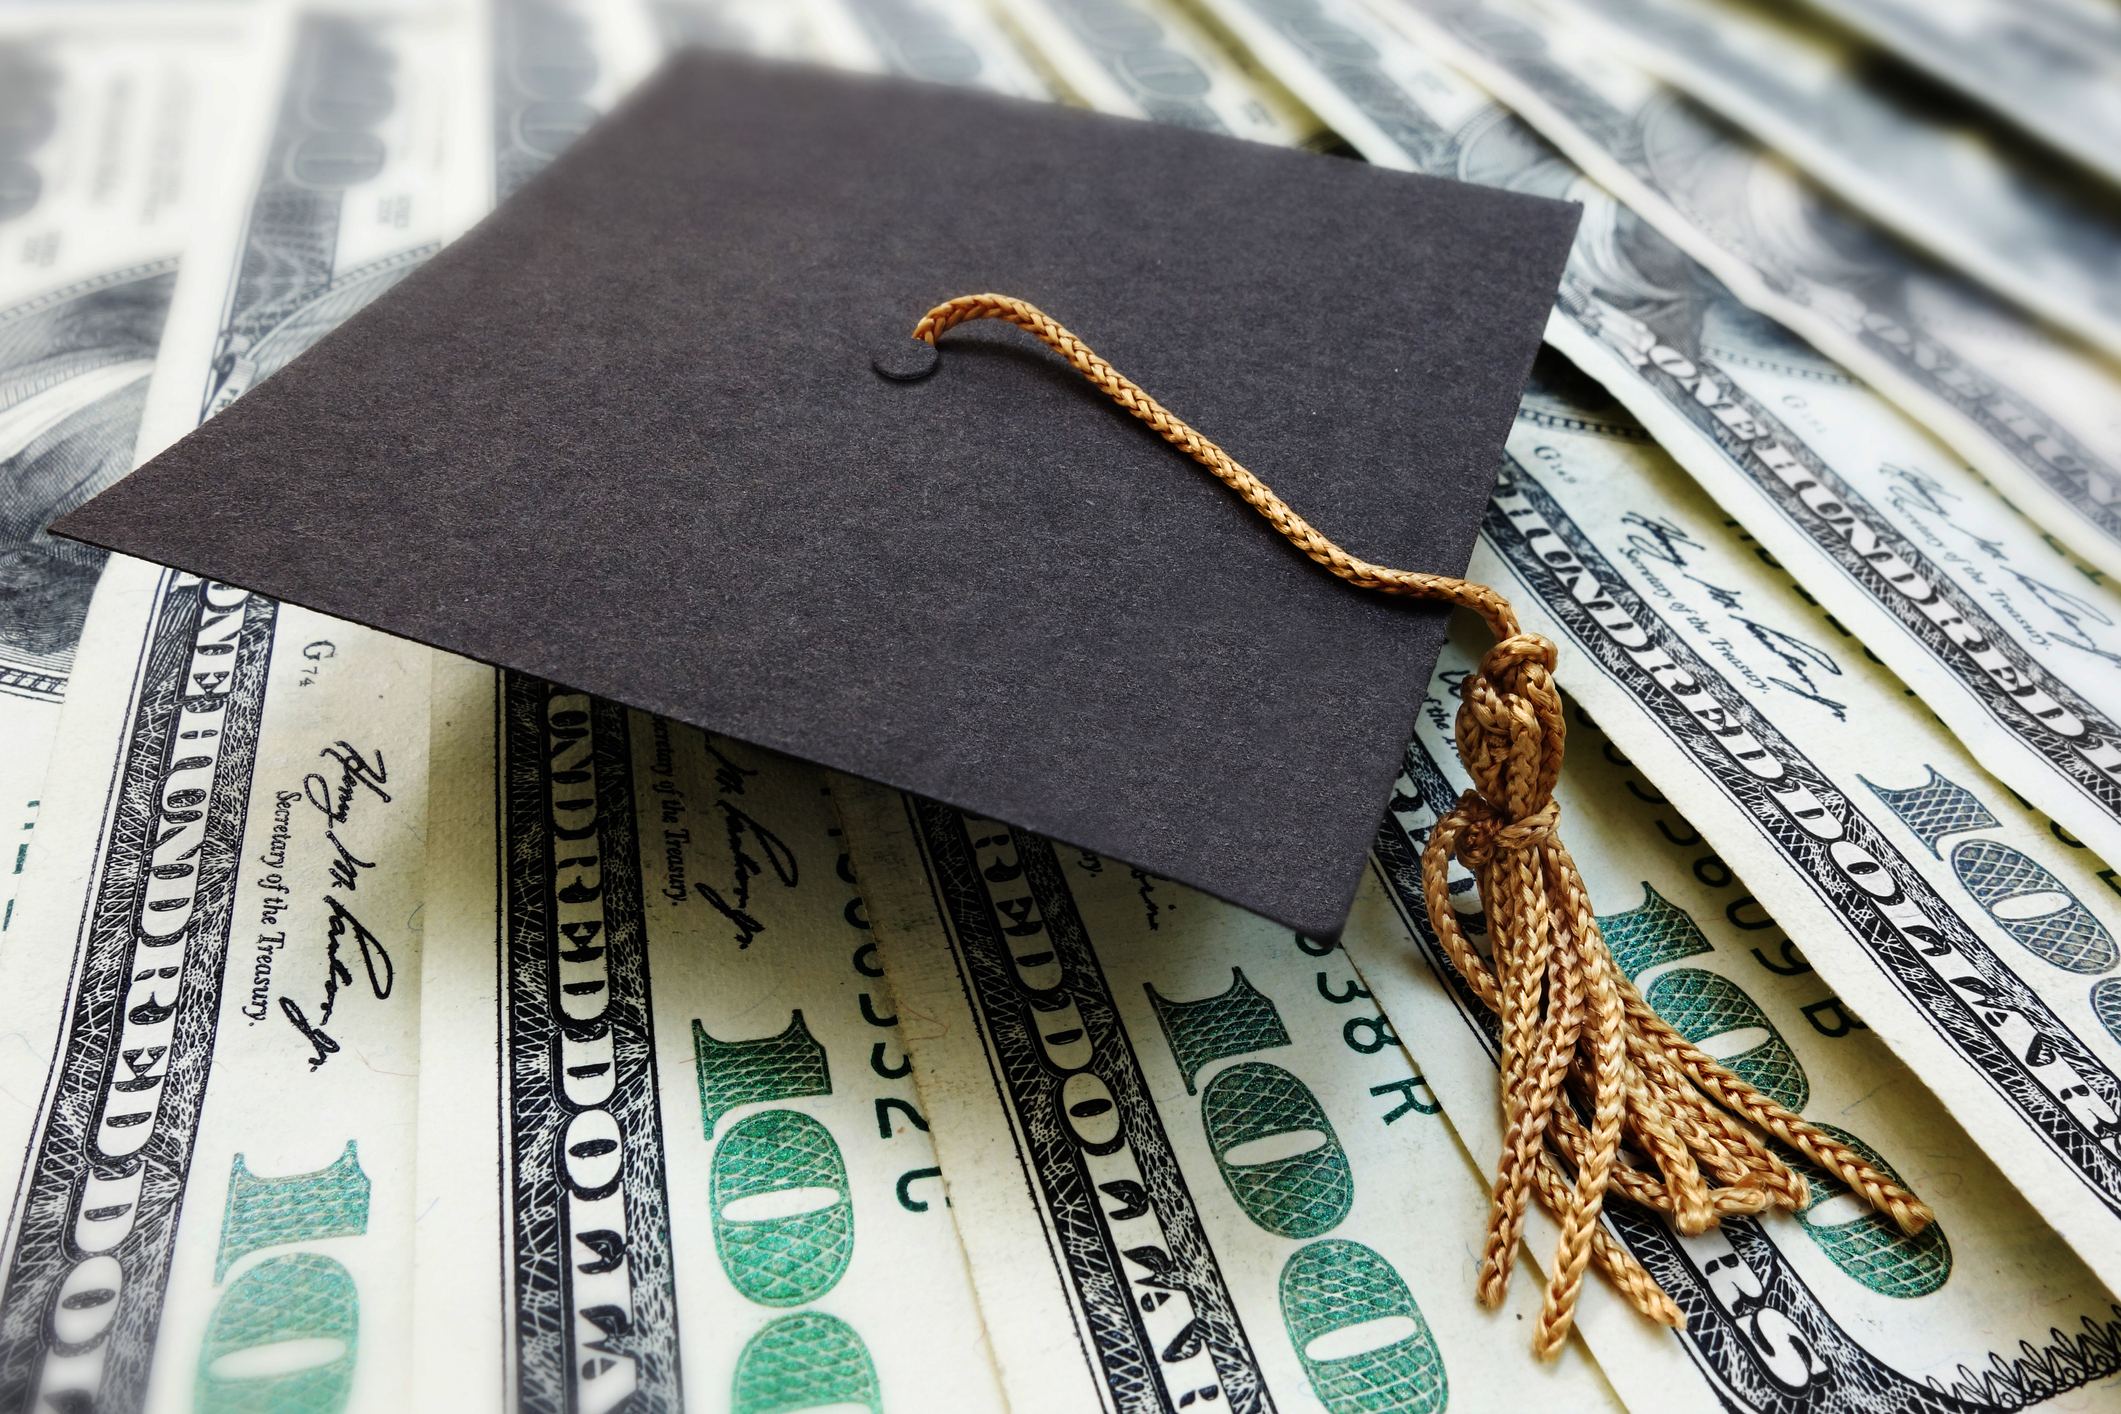 7 Things Graduates Should Consider Selling To Pay Off Student Loans